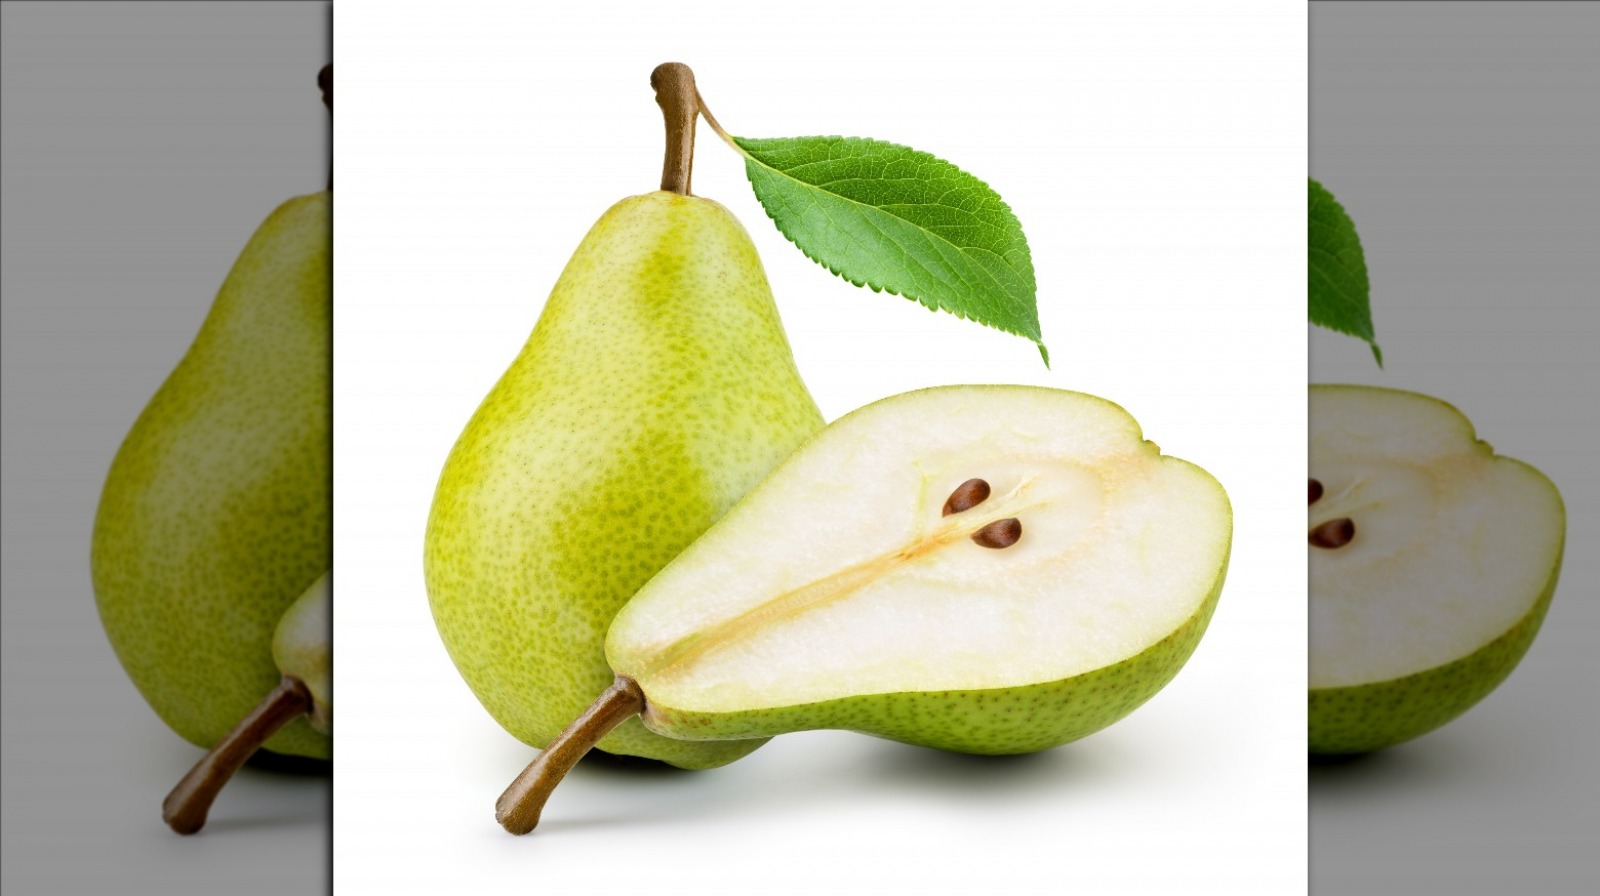 https://www.mashed.com/img/gallery/the-real-reason-your-pears-wont-ripen/l-intro-1604516859.jpg